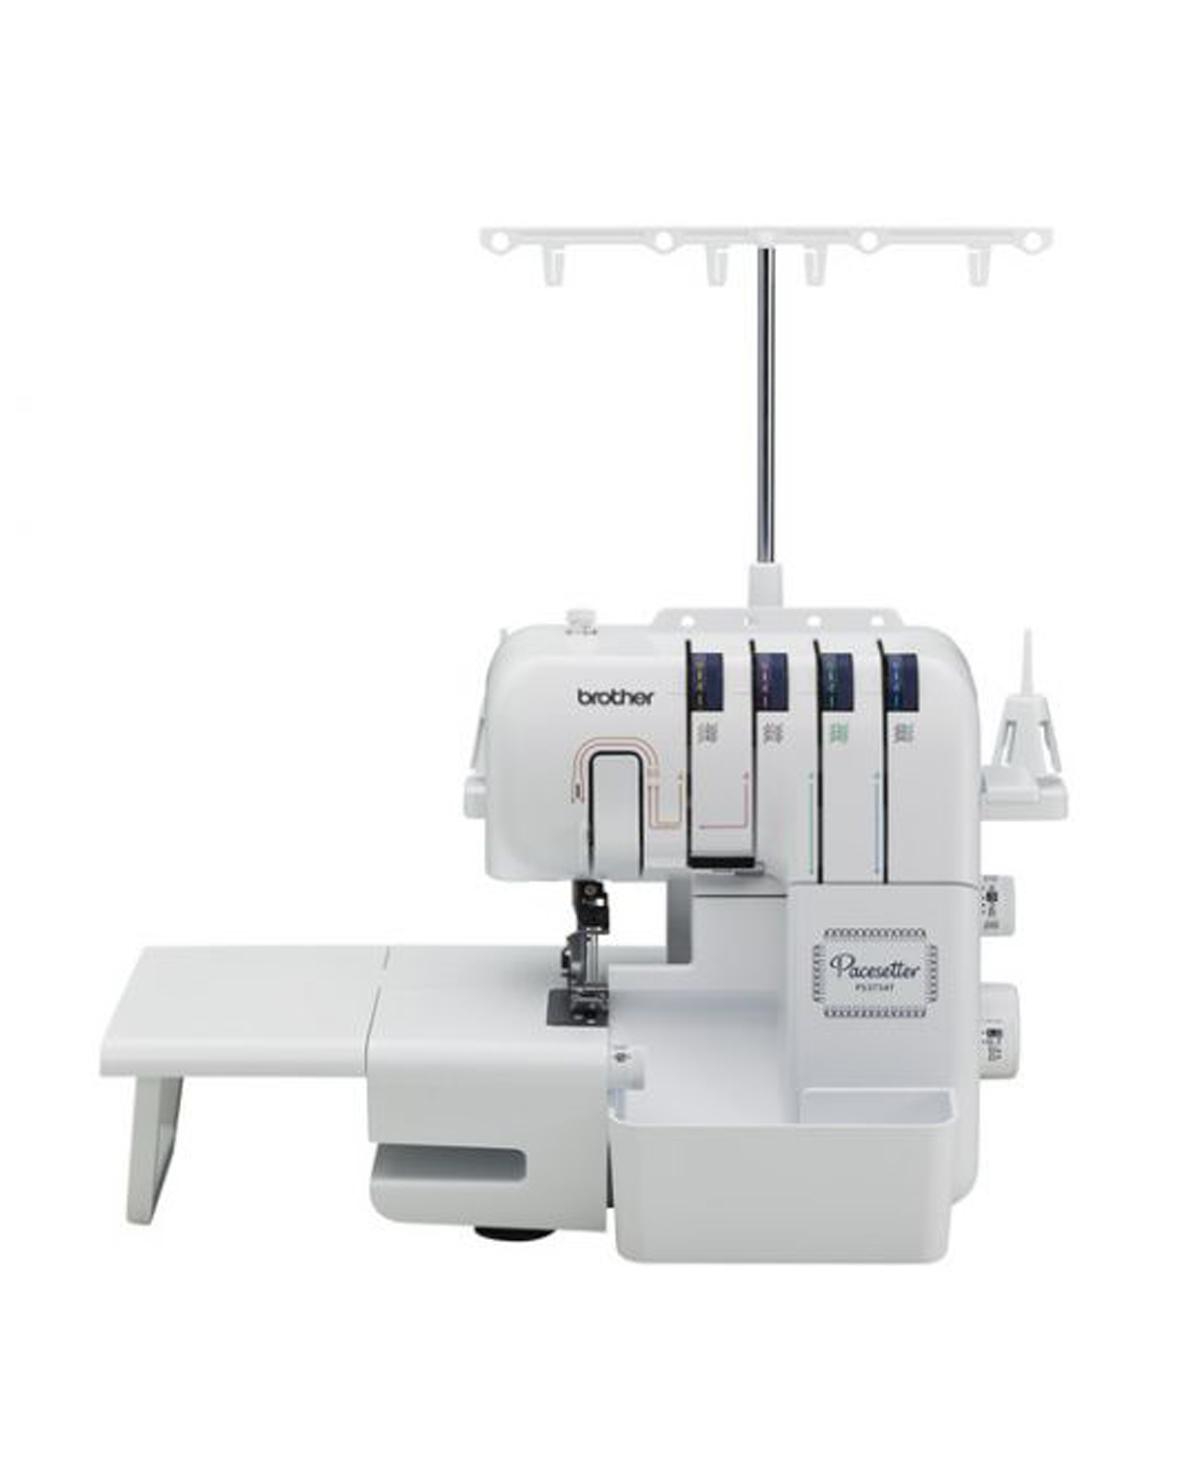 PS3734T Pacesetter Serger Overlock Sewing Machine - White